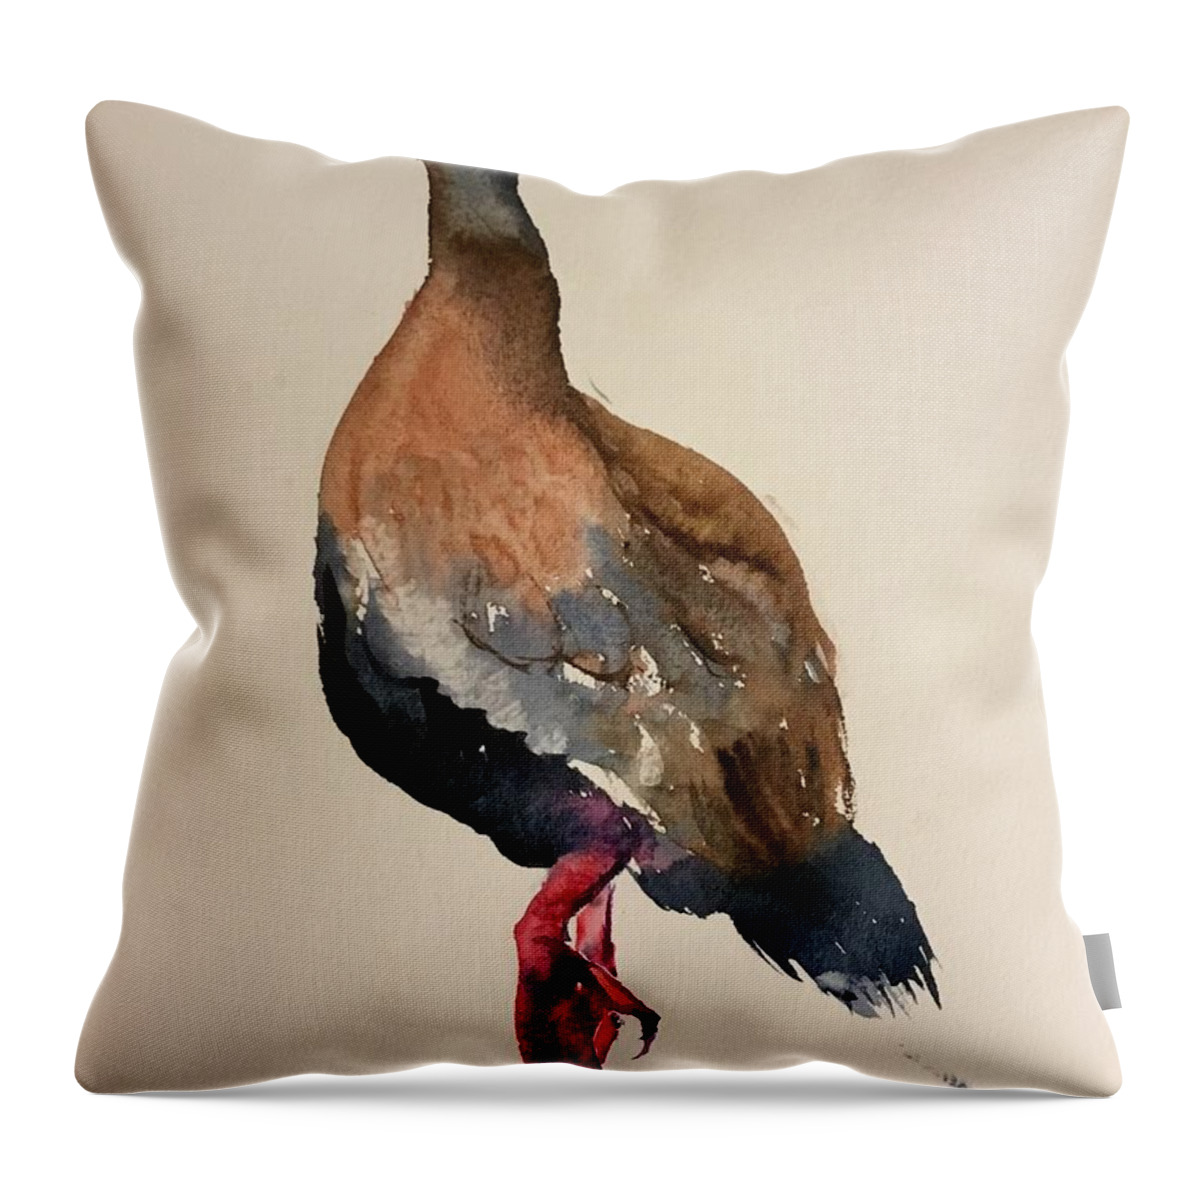 1252019 Throw Pillow featuring the painting 1252019 by Han in Huang wong